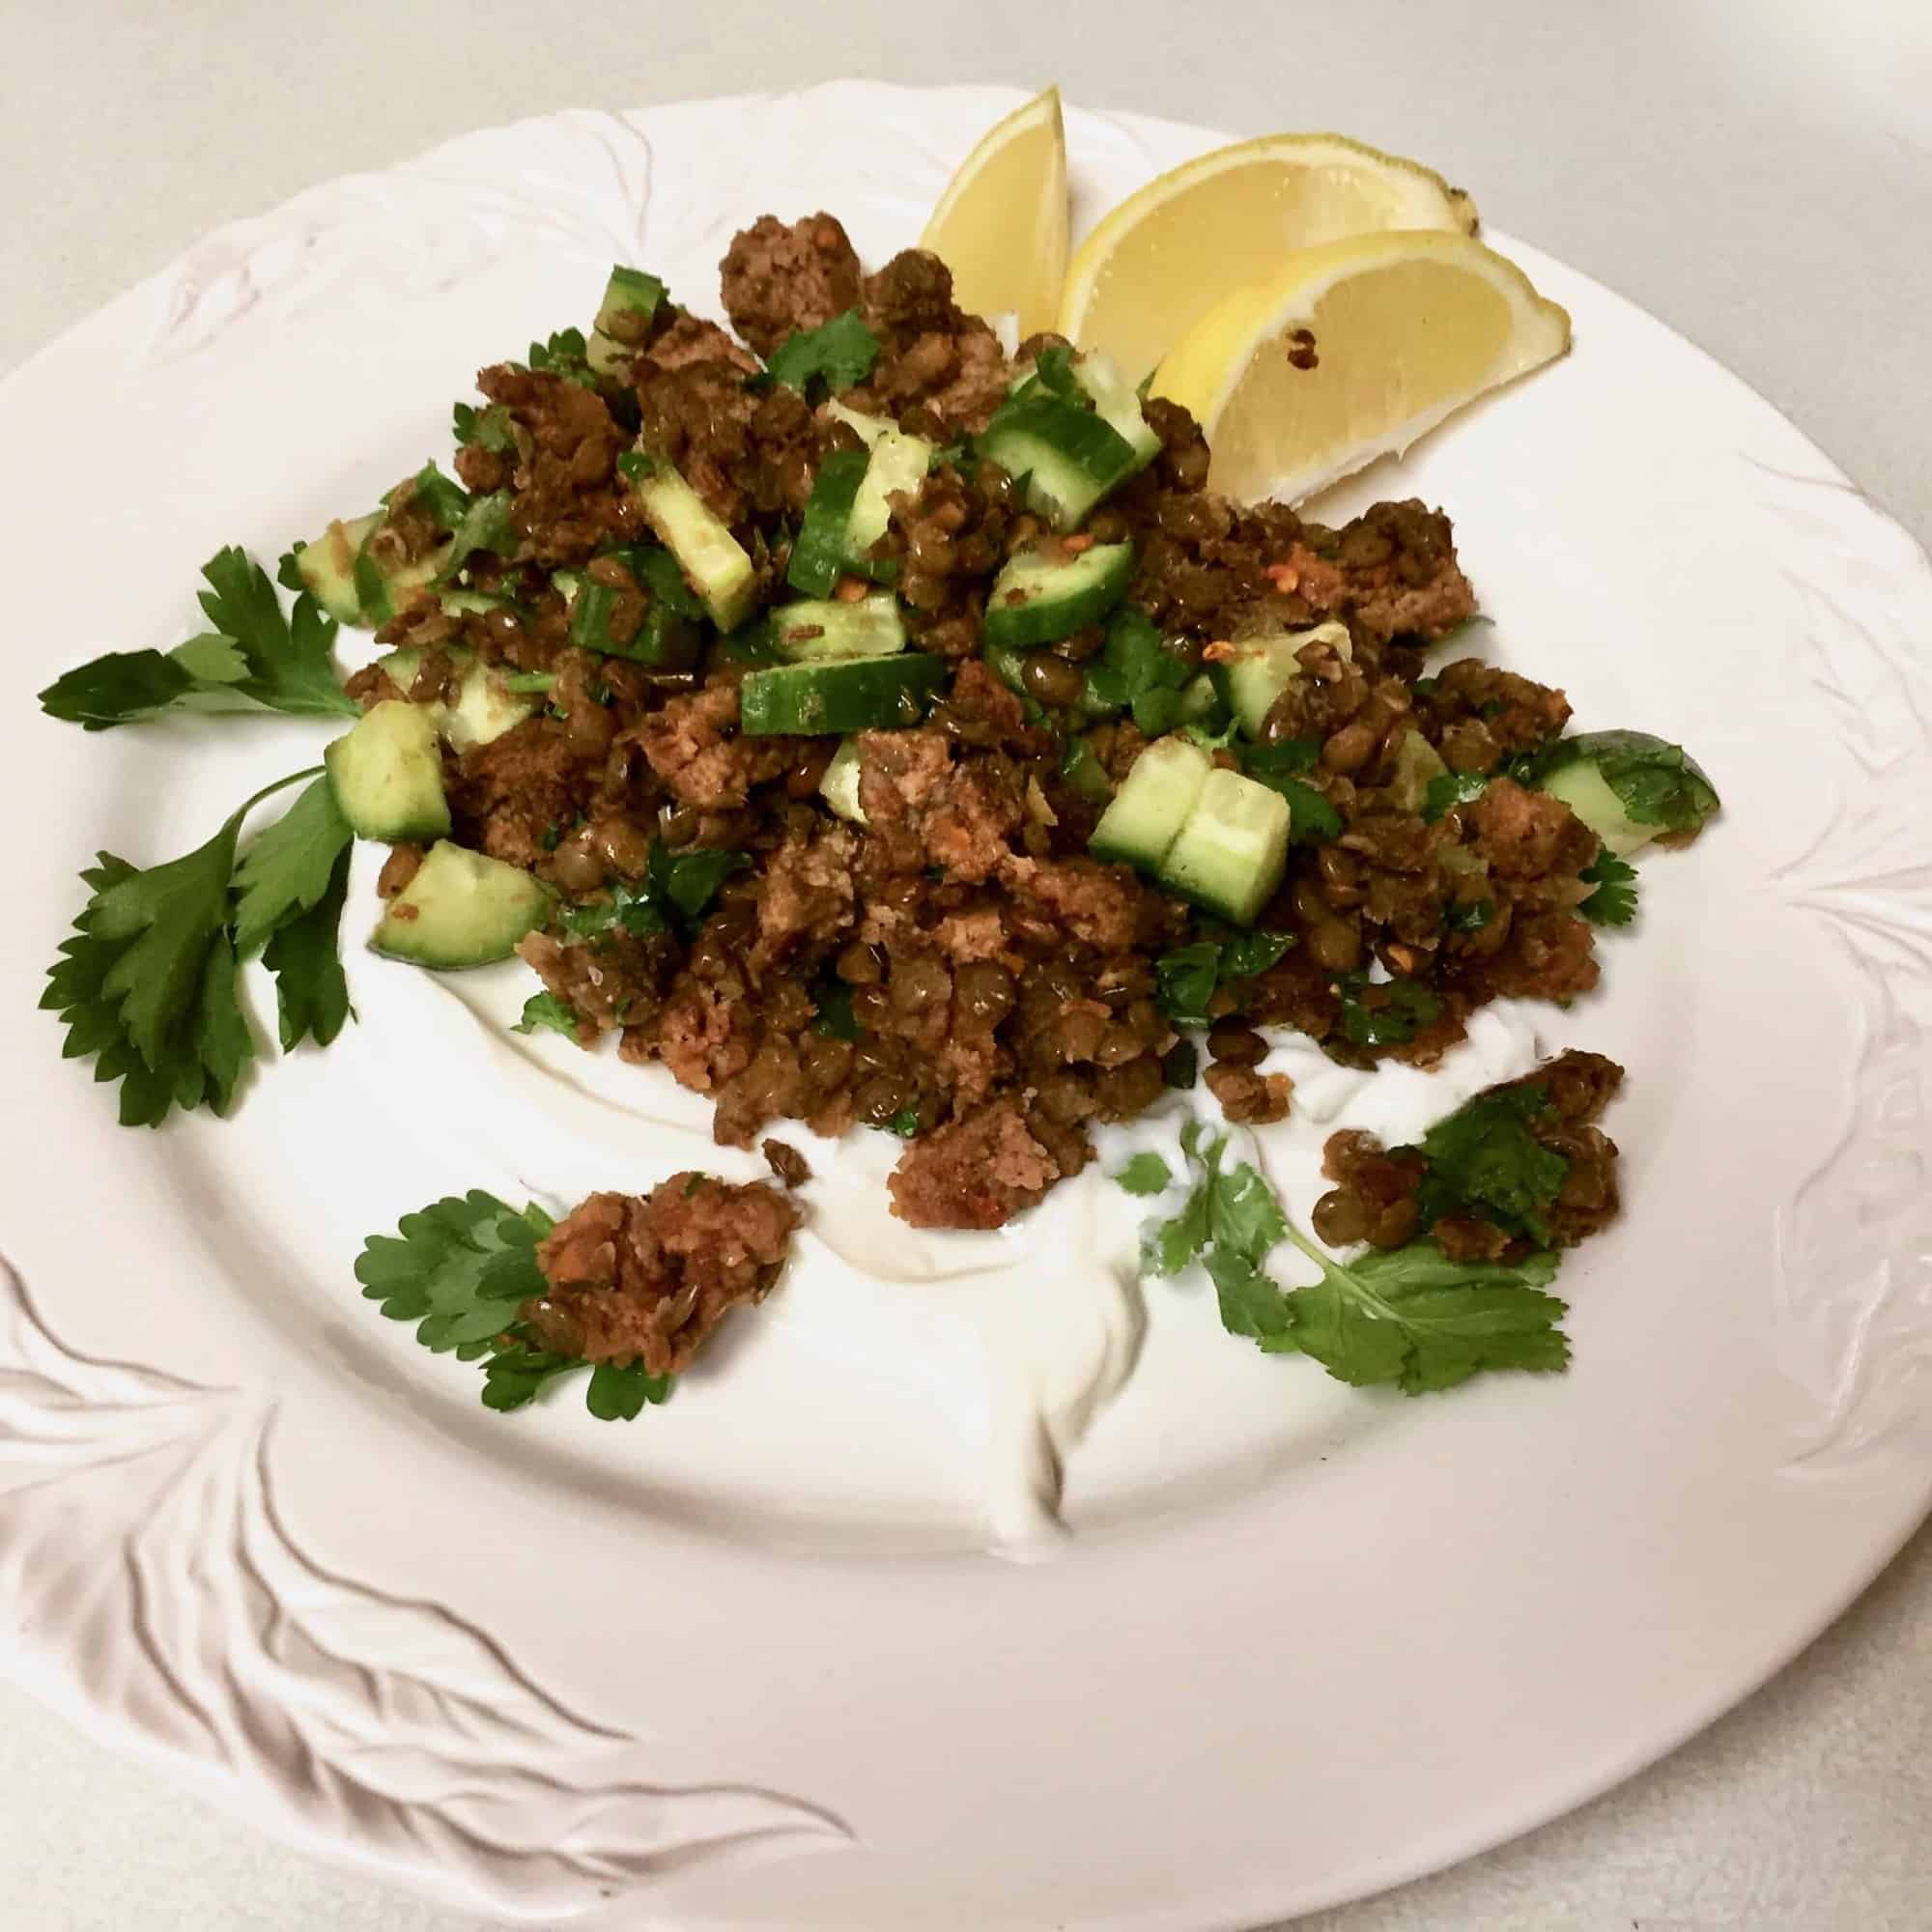 Spicy Lamb and Lentils with Herbs